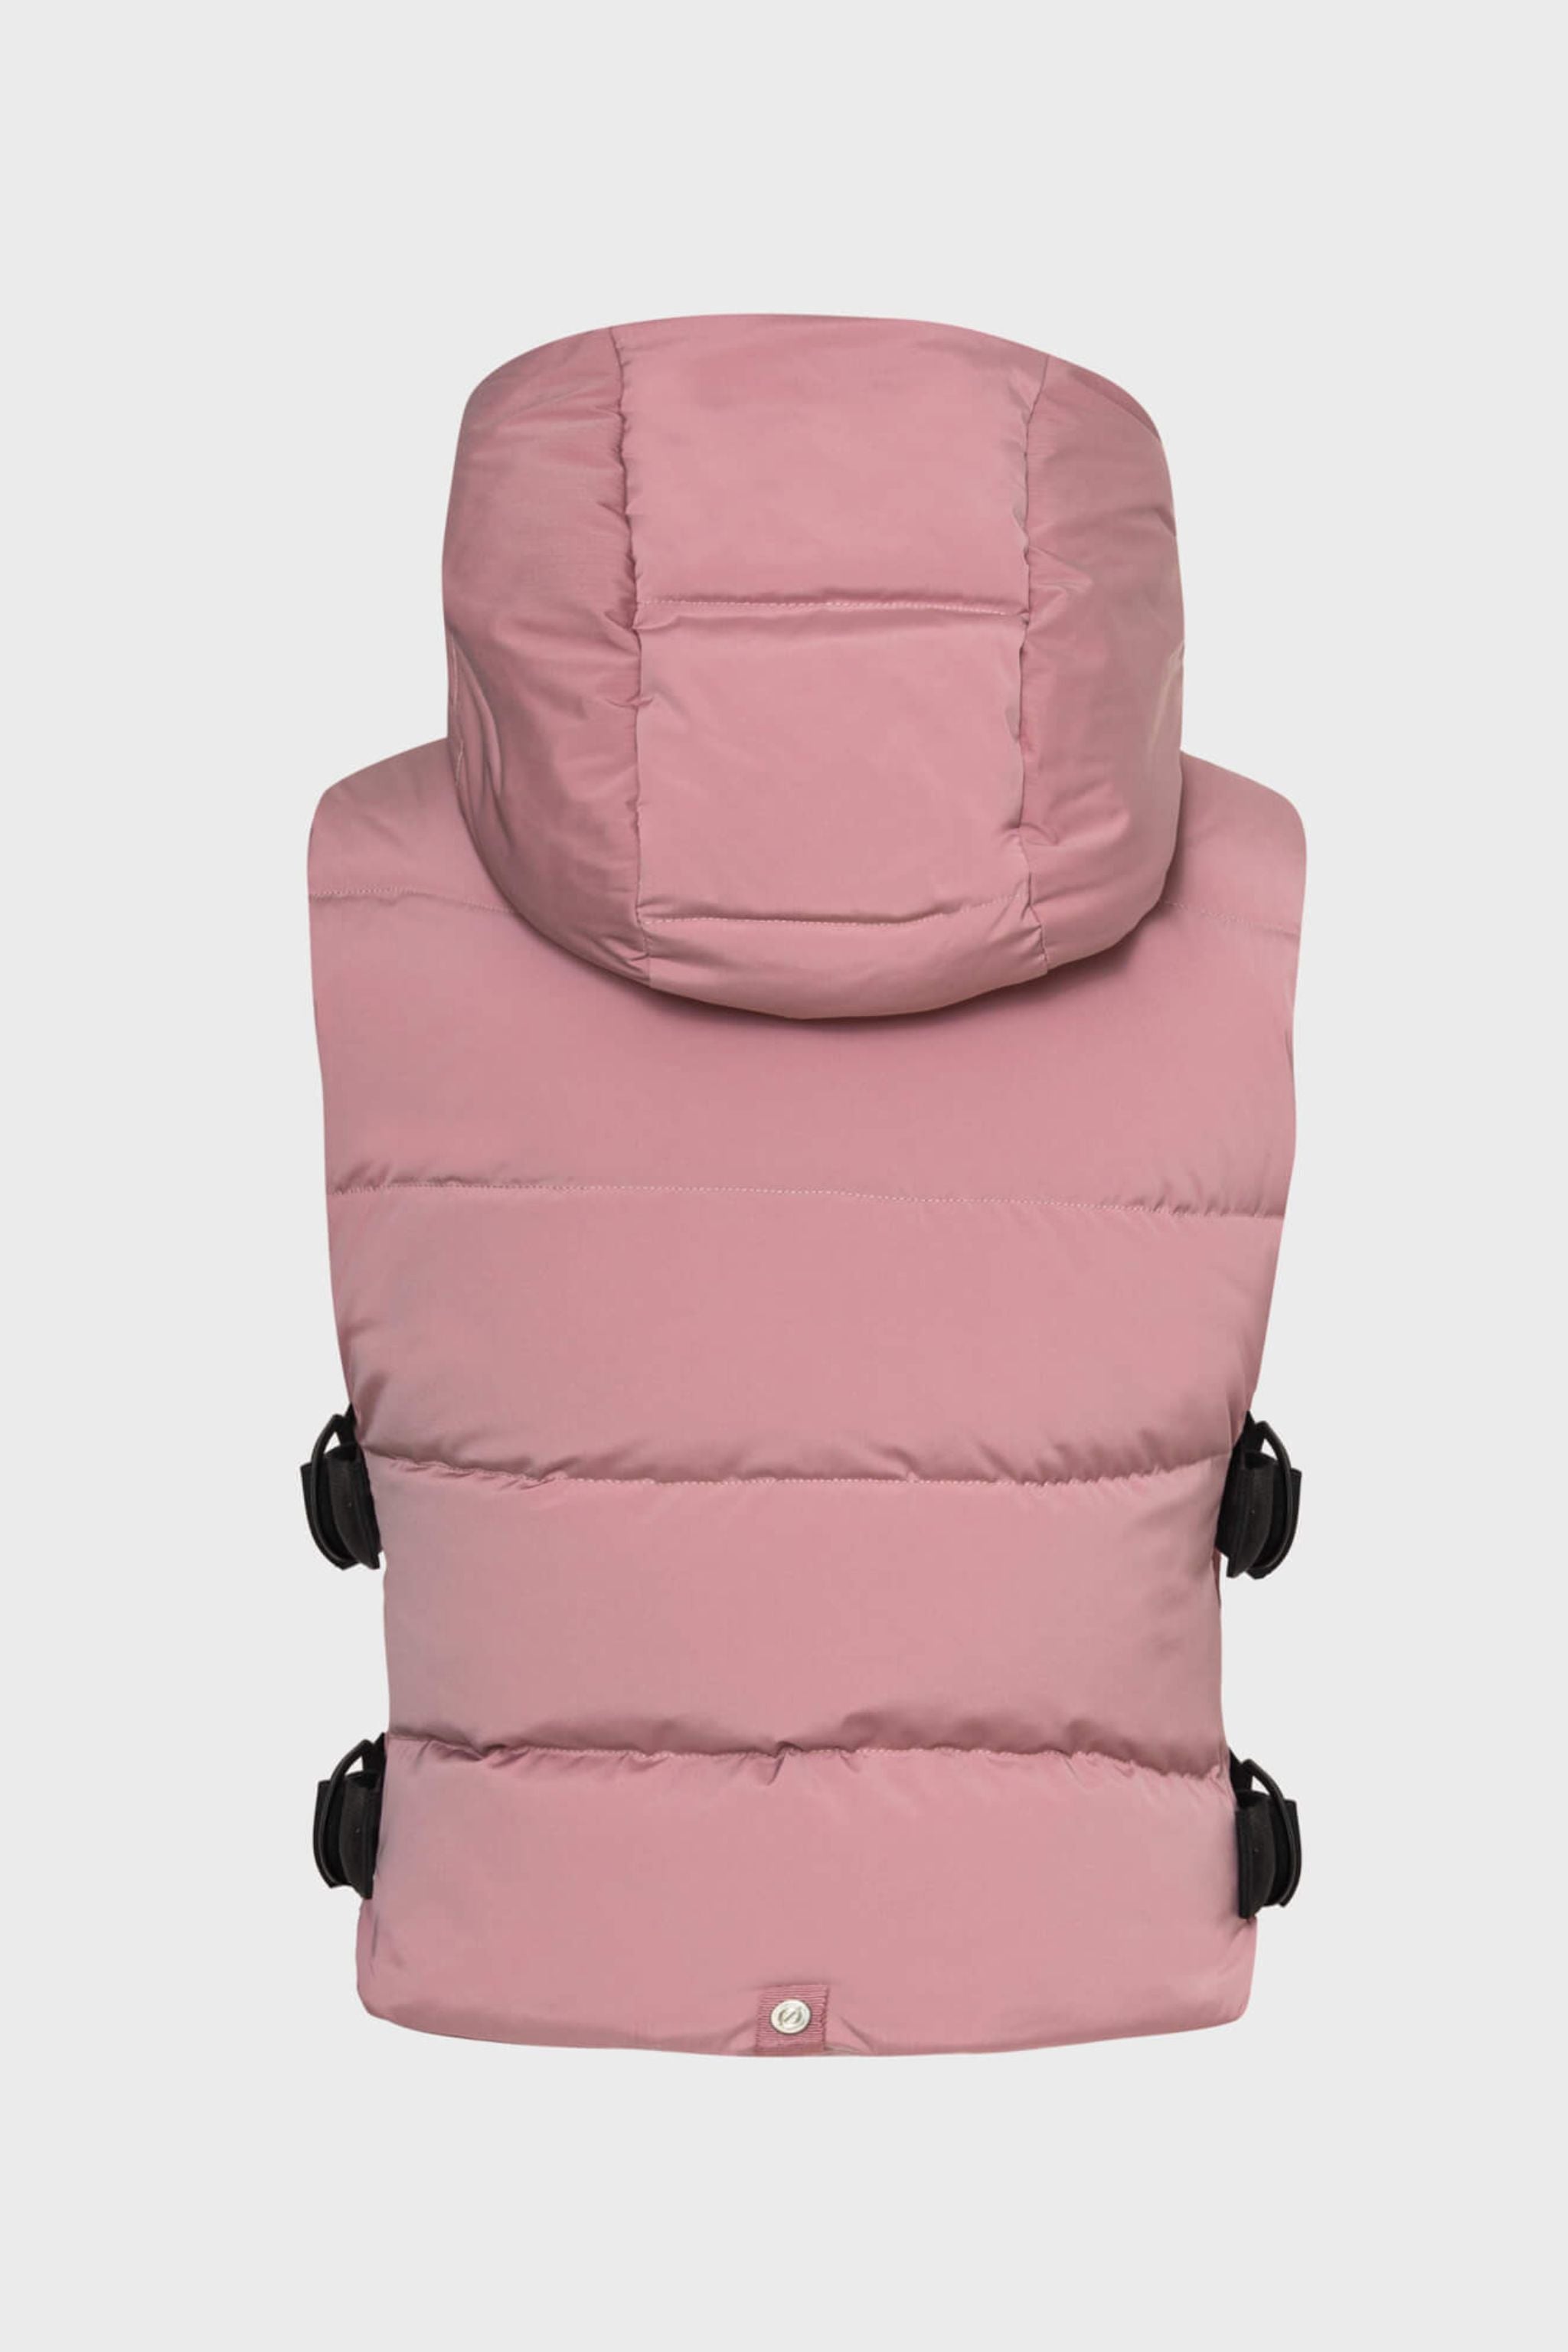 Lola quilted hooded zip vest with side buckles